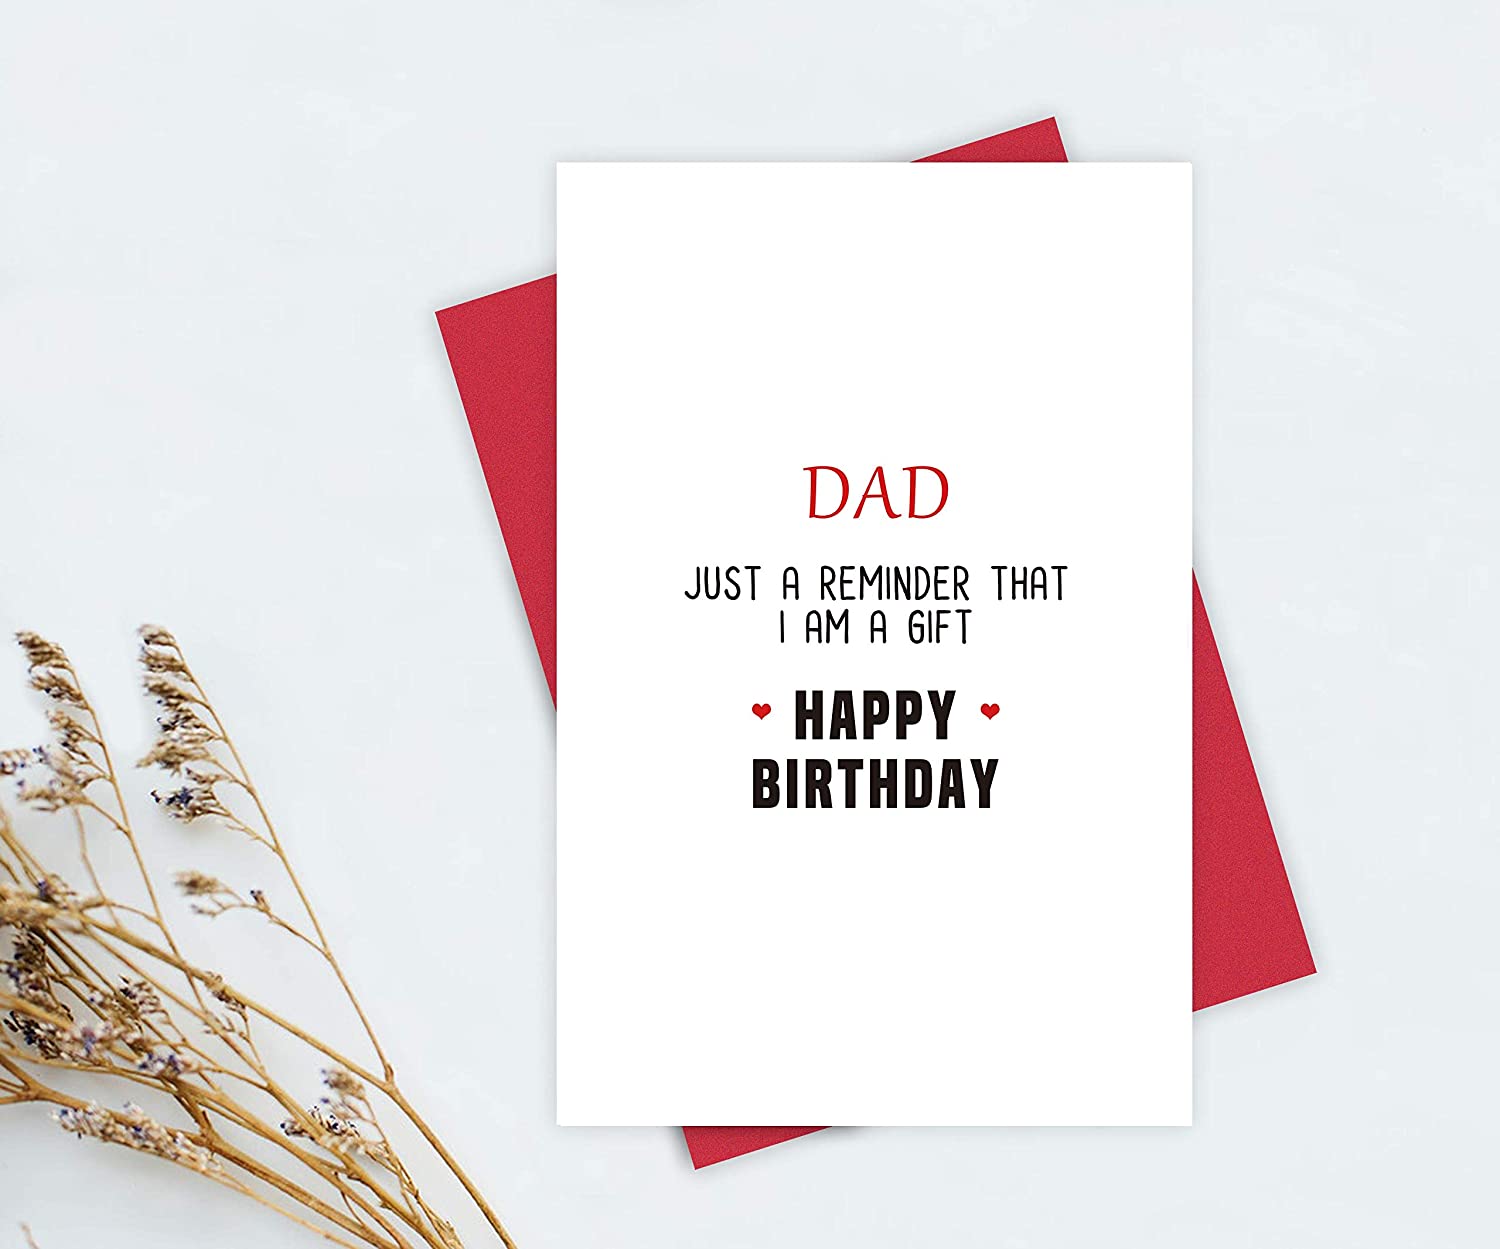 Funny Birthday Card for Father Dad, Birthday Card from Daughter, Dad Just a Reminder That I Am a Gift